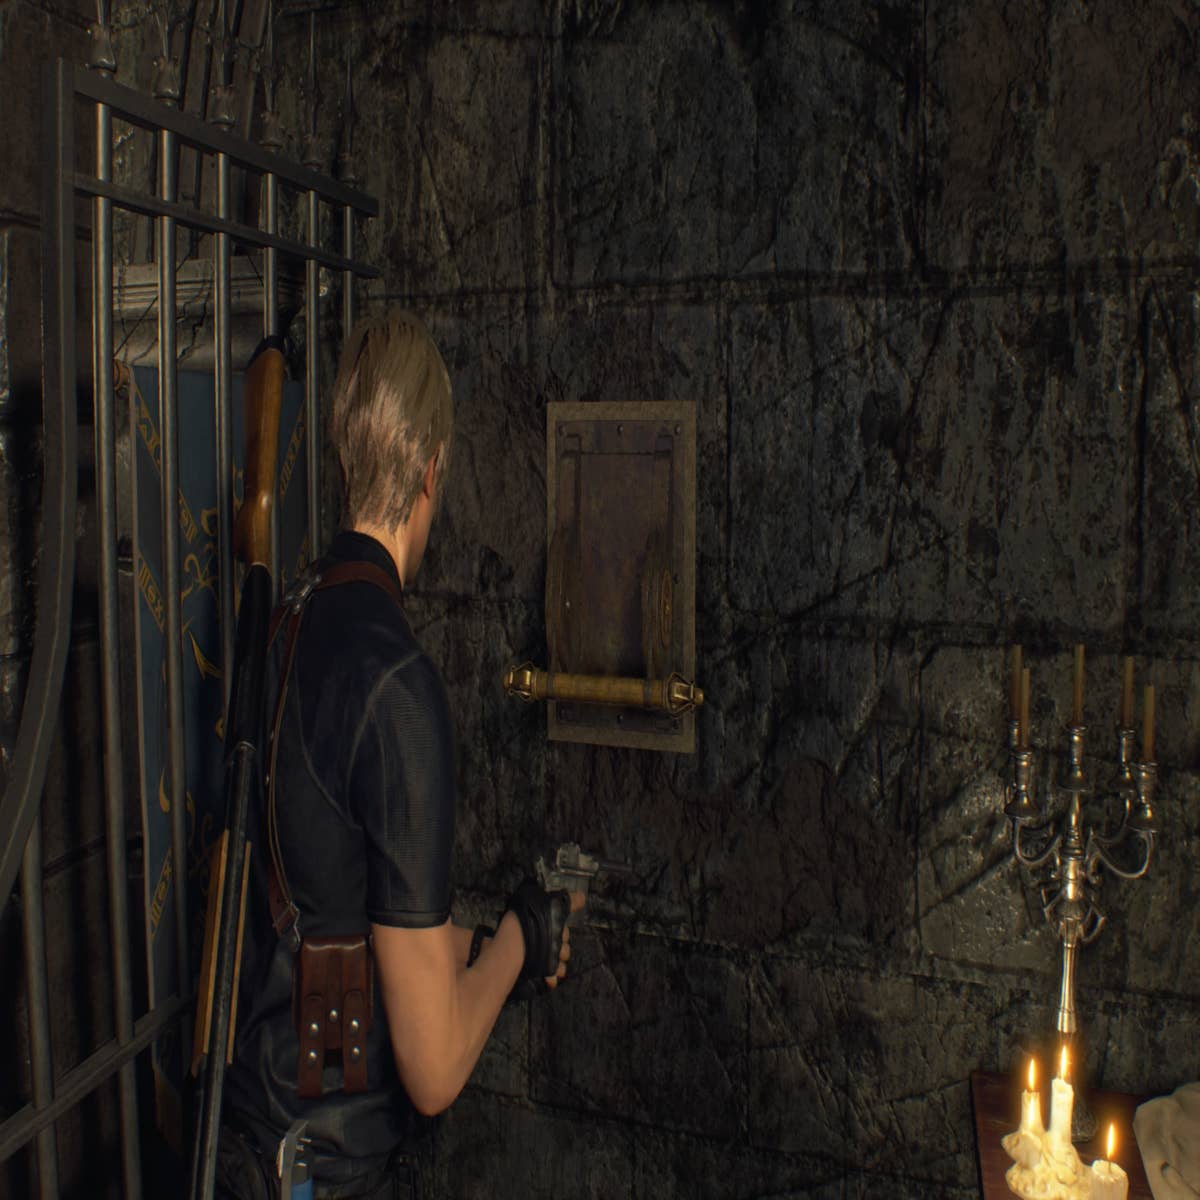 Resident Evil 4 church puzzle solution explained